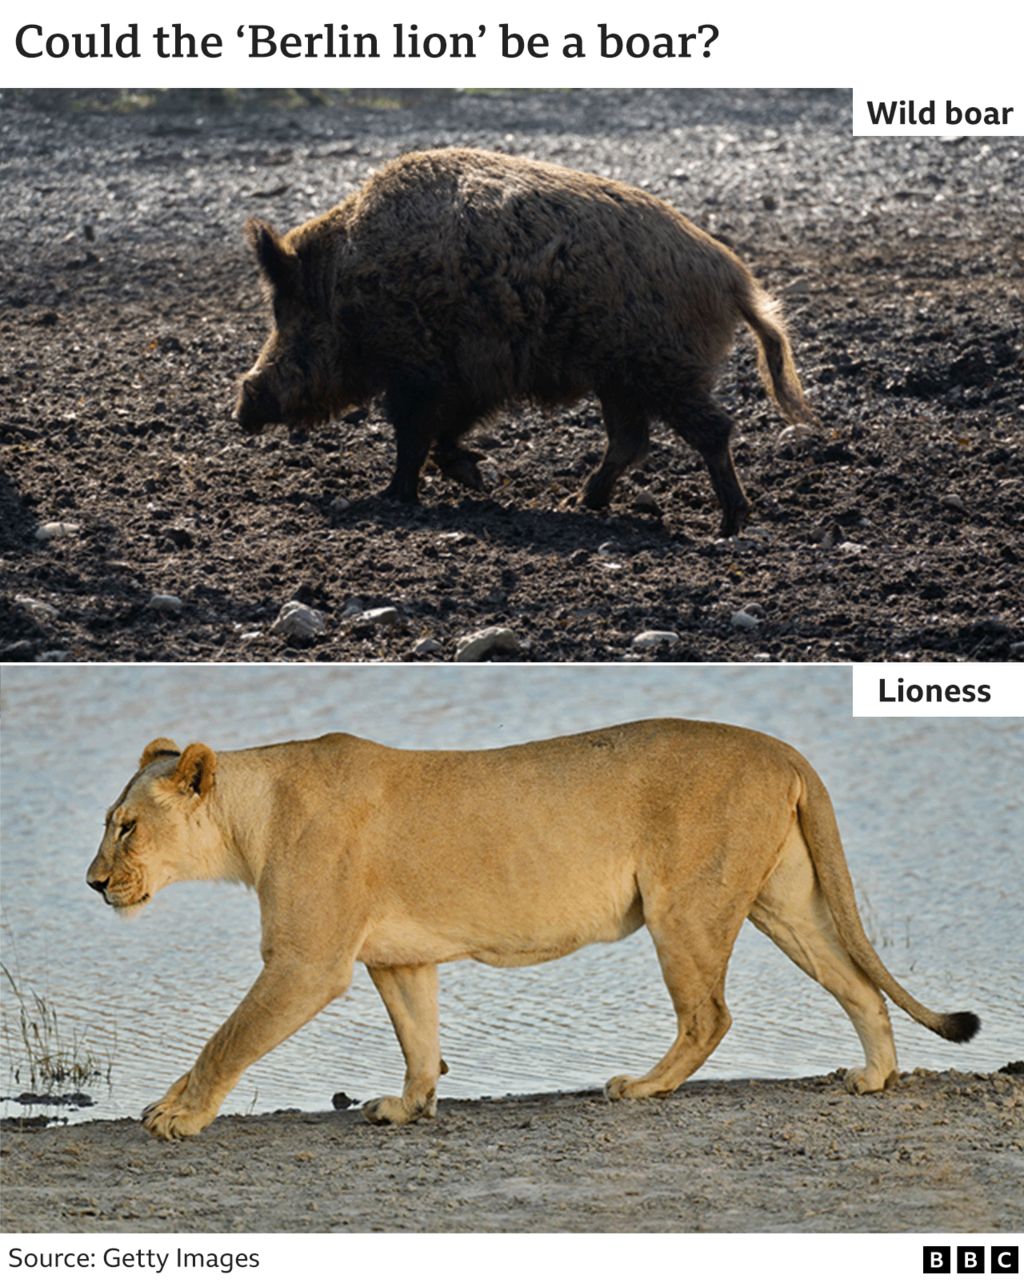 File photos of a wild boar (top) and a lioness